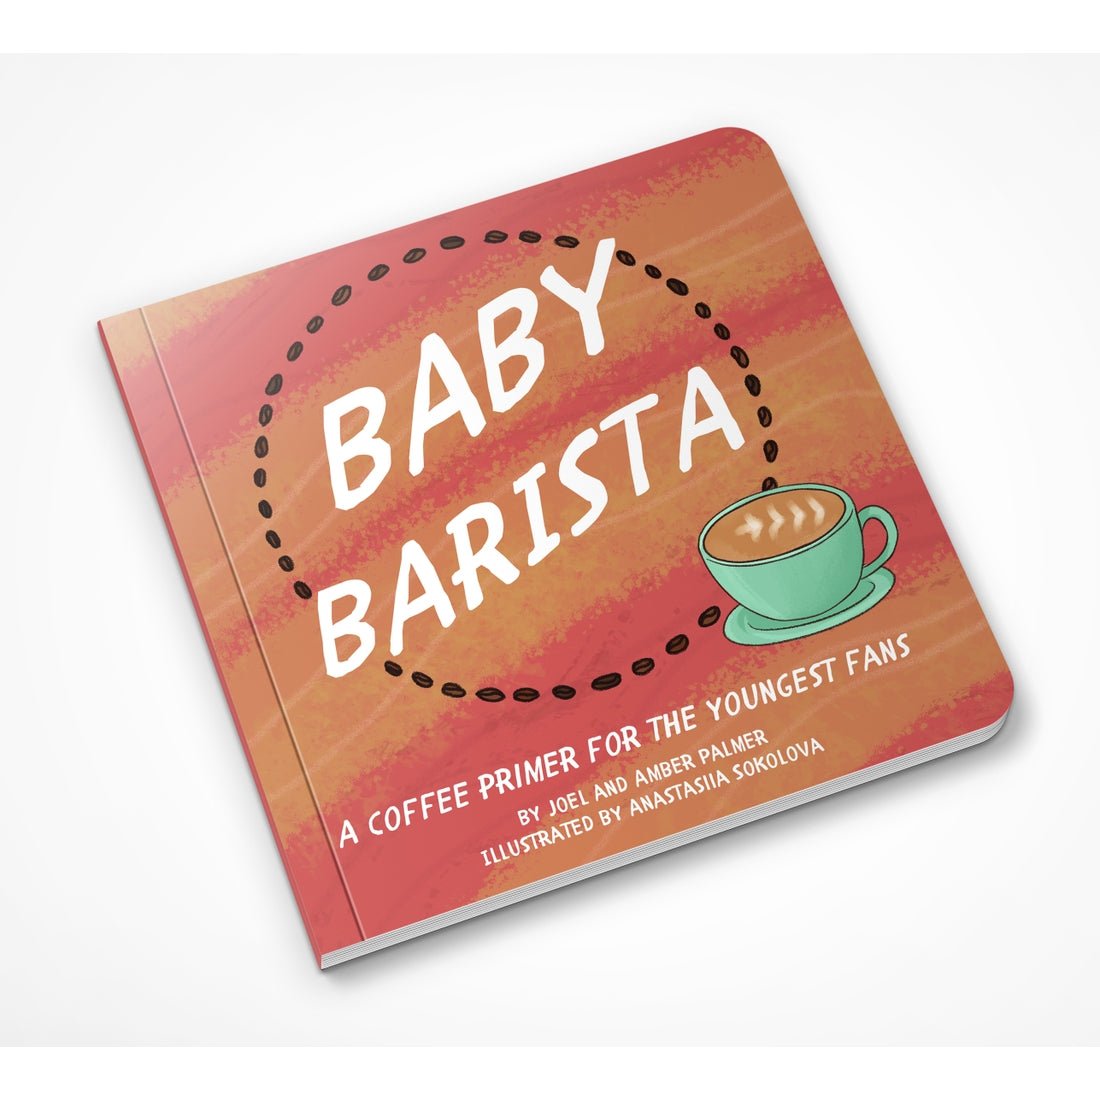 https://shopdaffodilly.com/cdn/shop/products/baby-barista-book-a-coffee-primer-for-the-youngest-fans-997016.jpg?v=1643149029